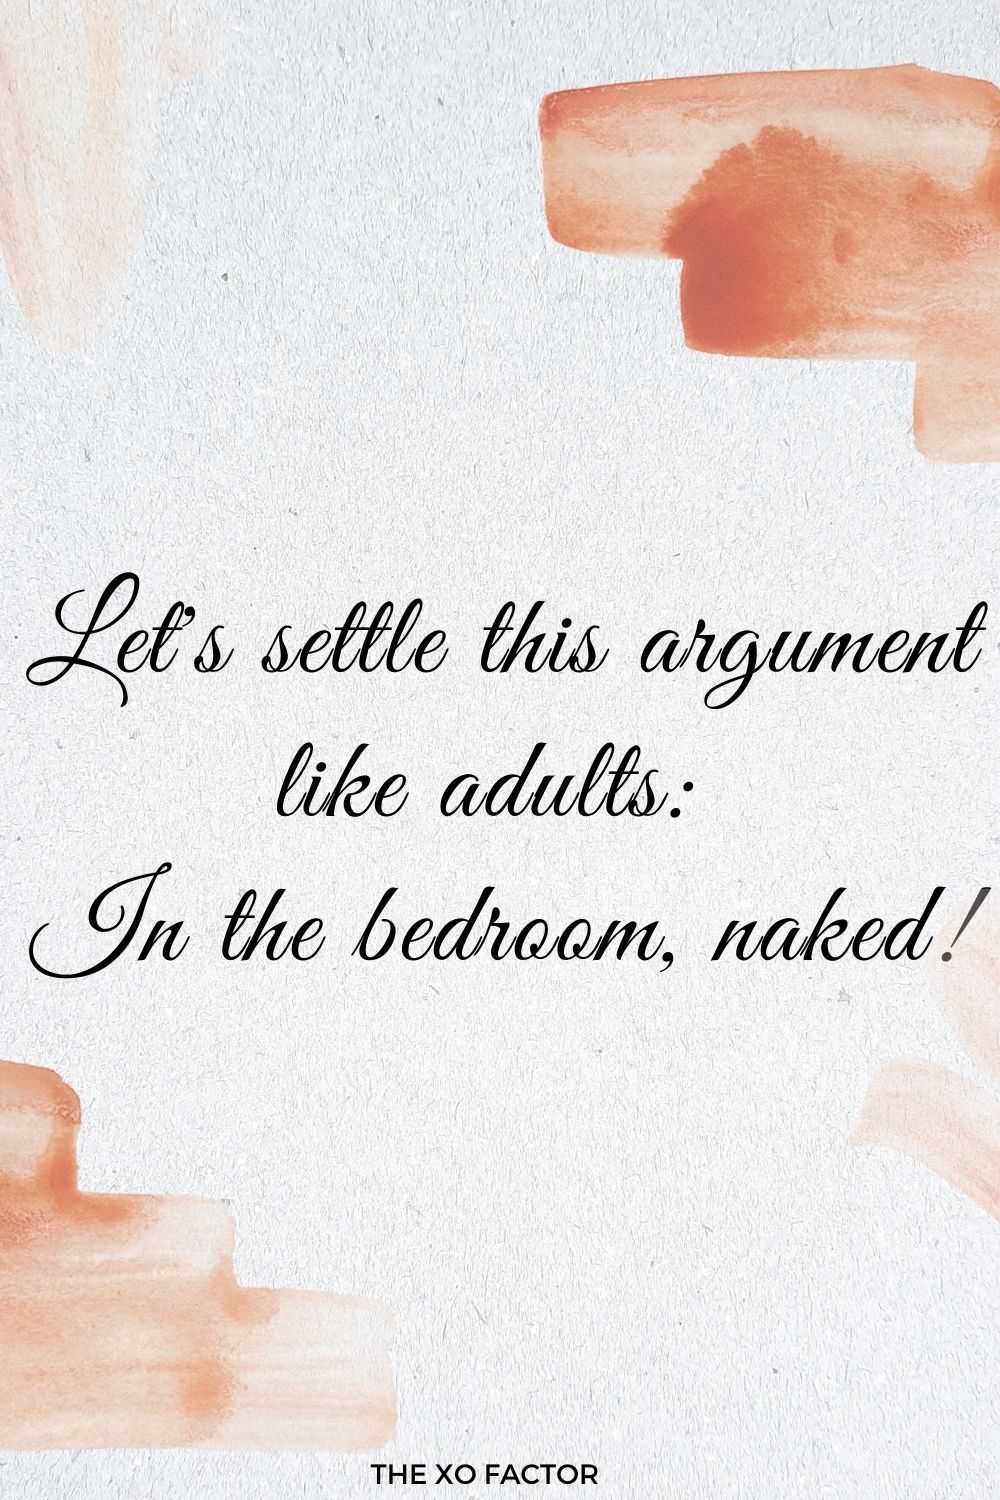 Let's settle this argument like adults: in the bedroom, naked!